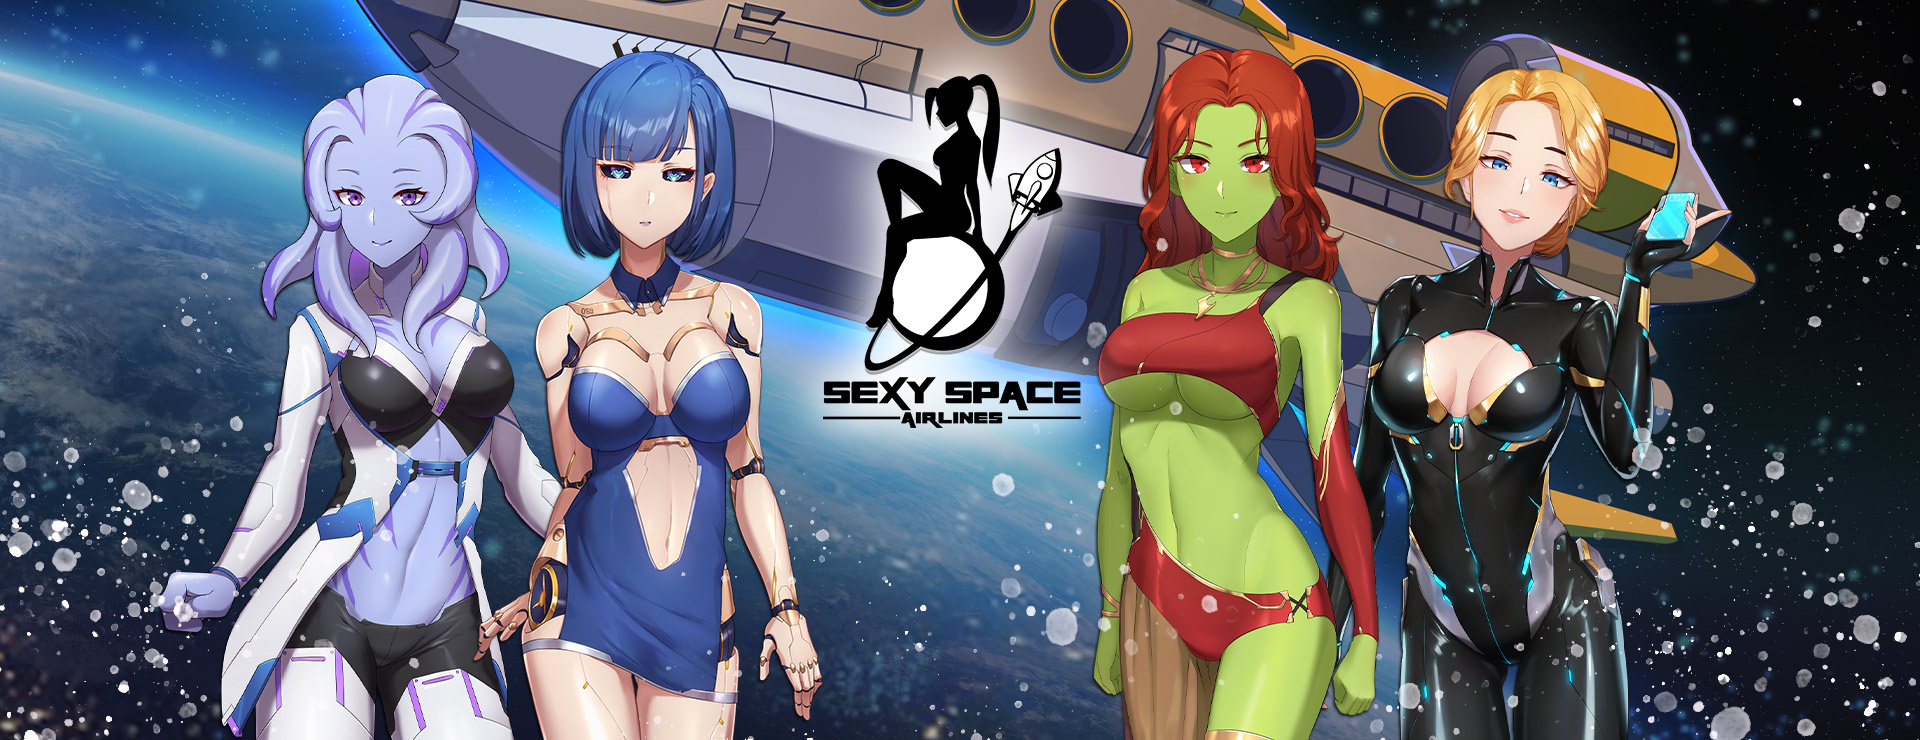 Sexy Space Airlines Game - Action Aventure Jeu